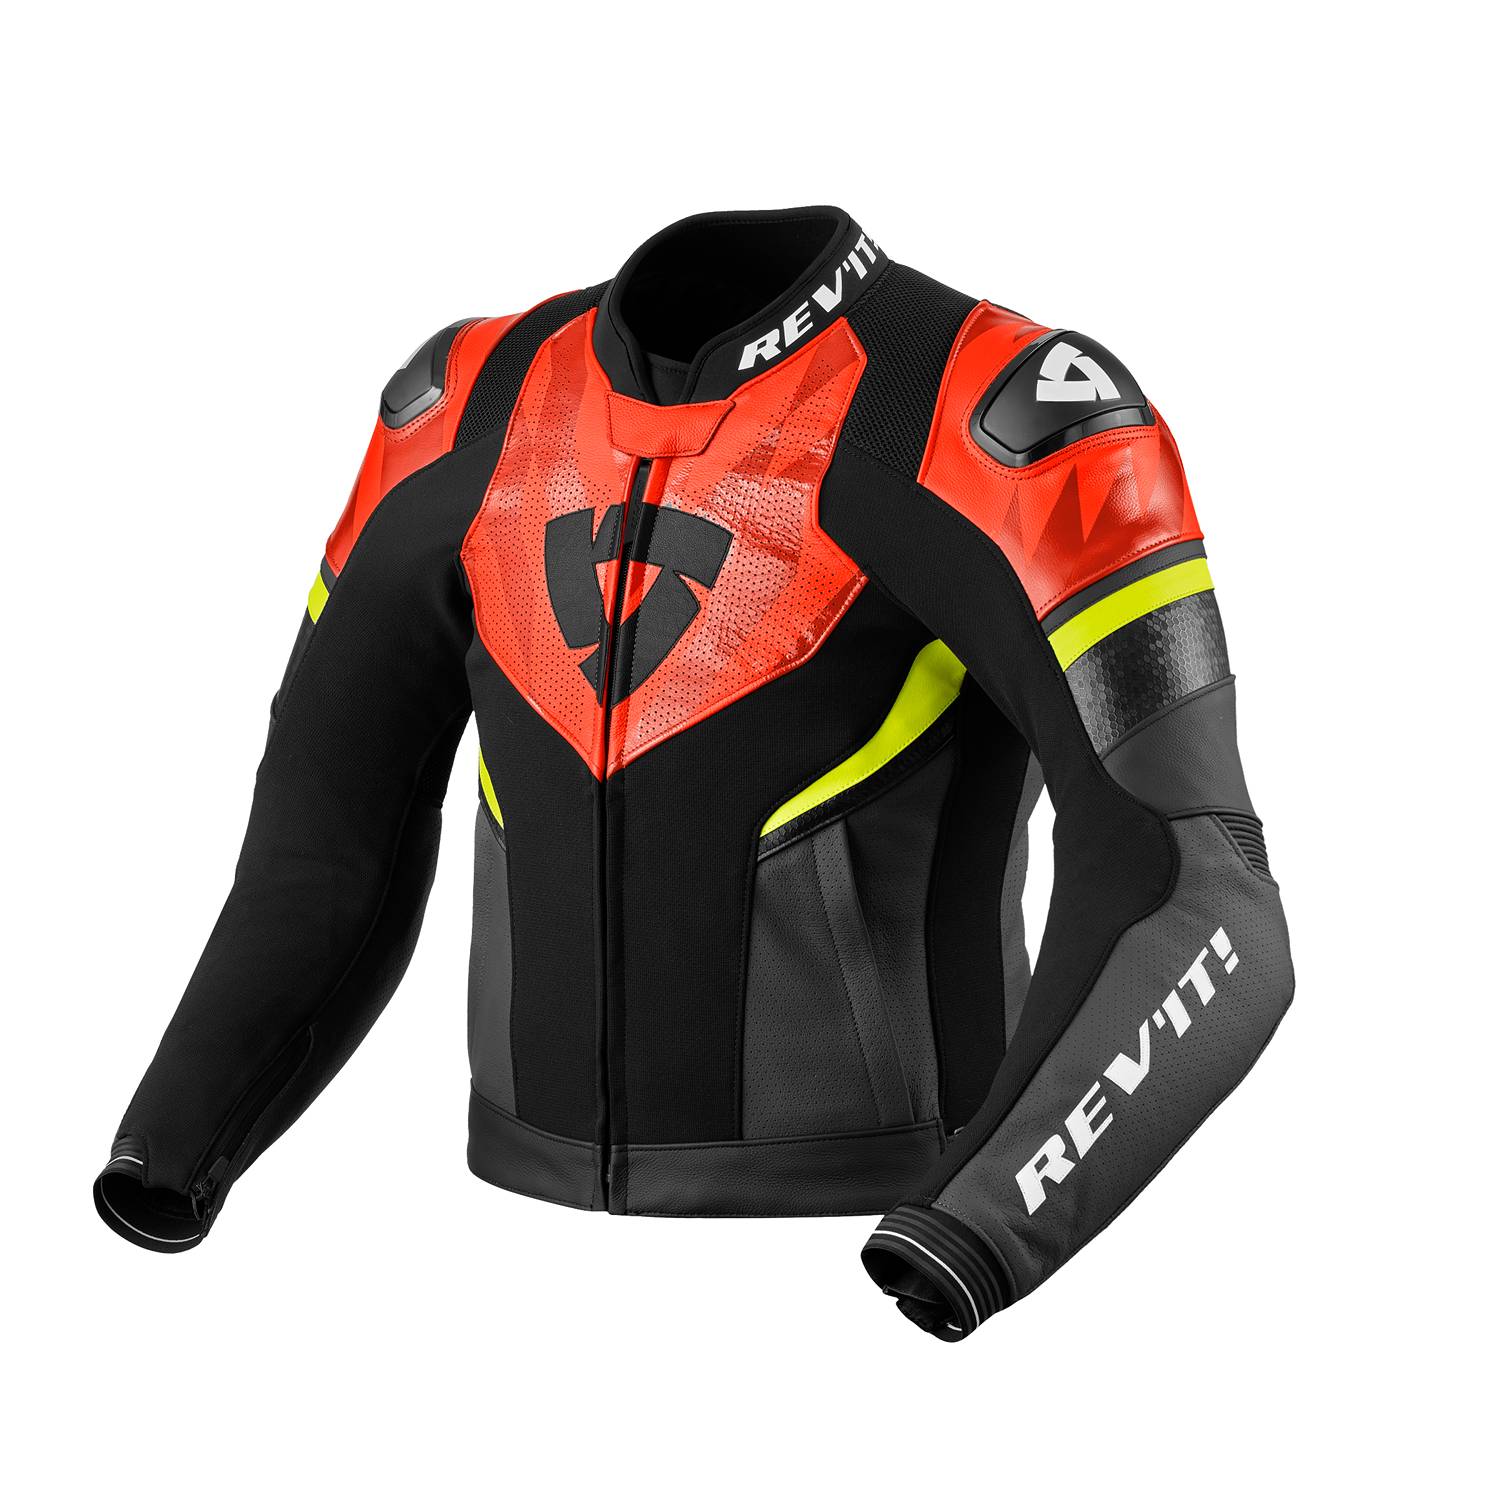 Image of REV'IT! Hyperspeed 2 Air Jacket Black Neon Red Size 48 ID 8700001358538